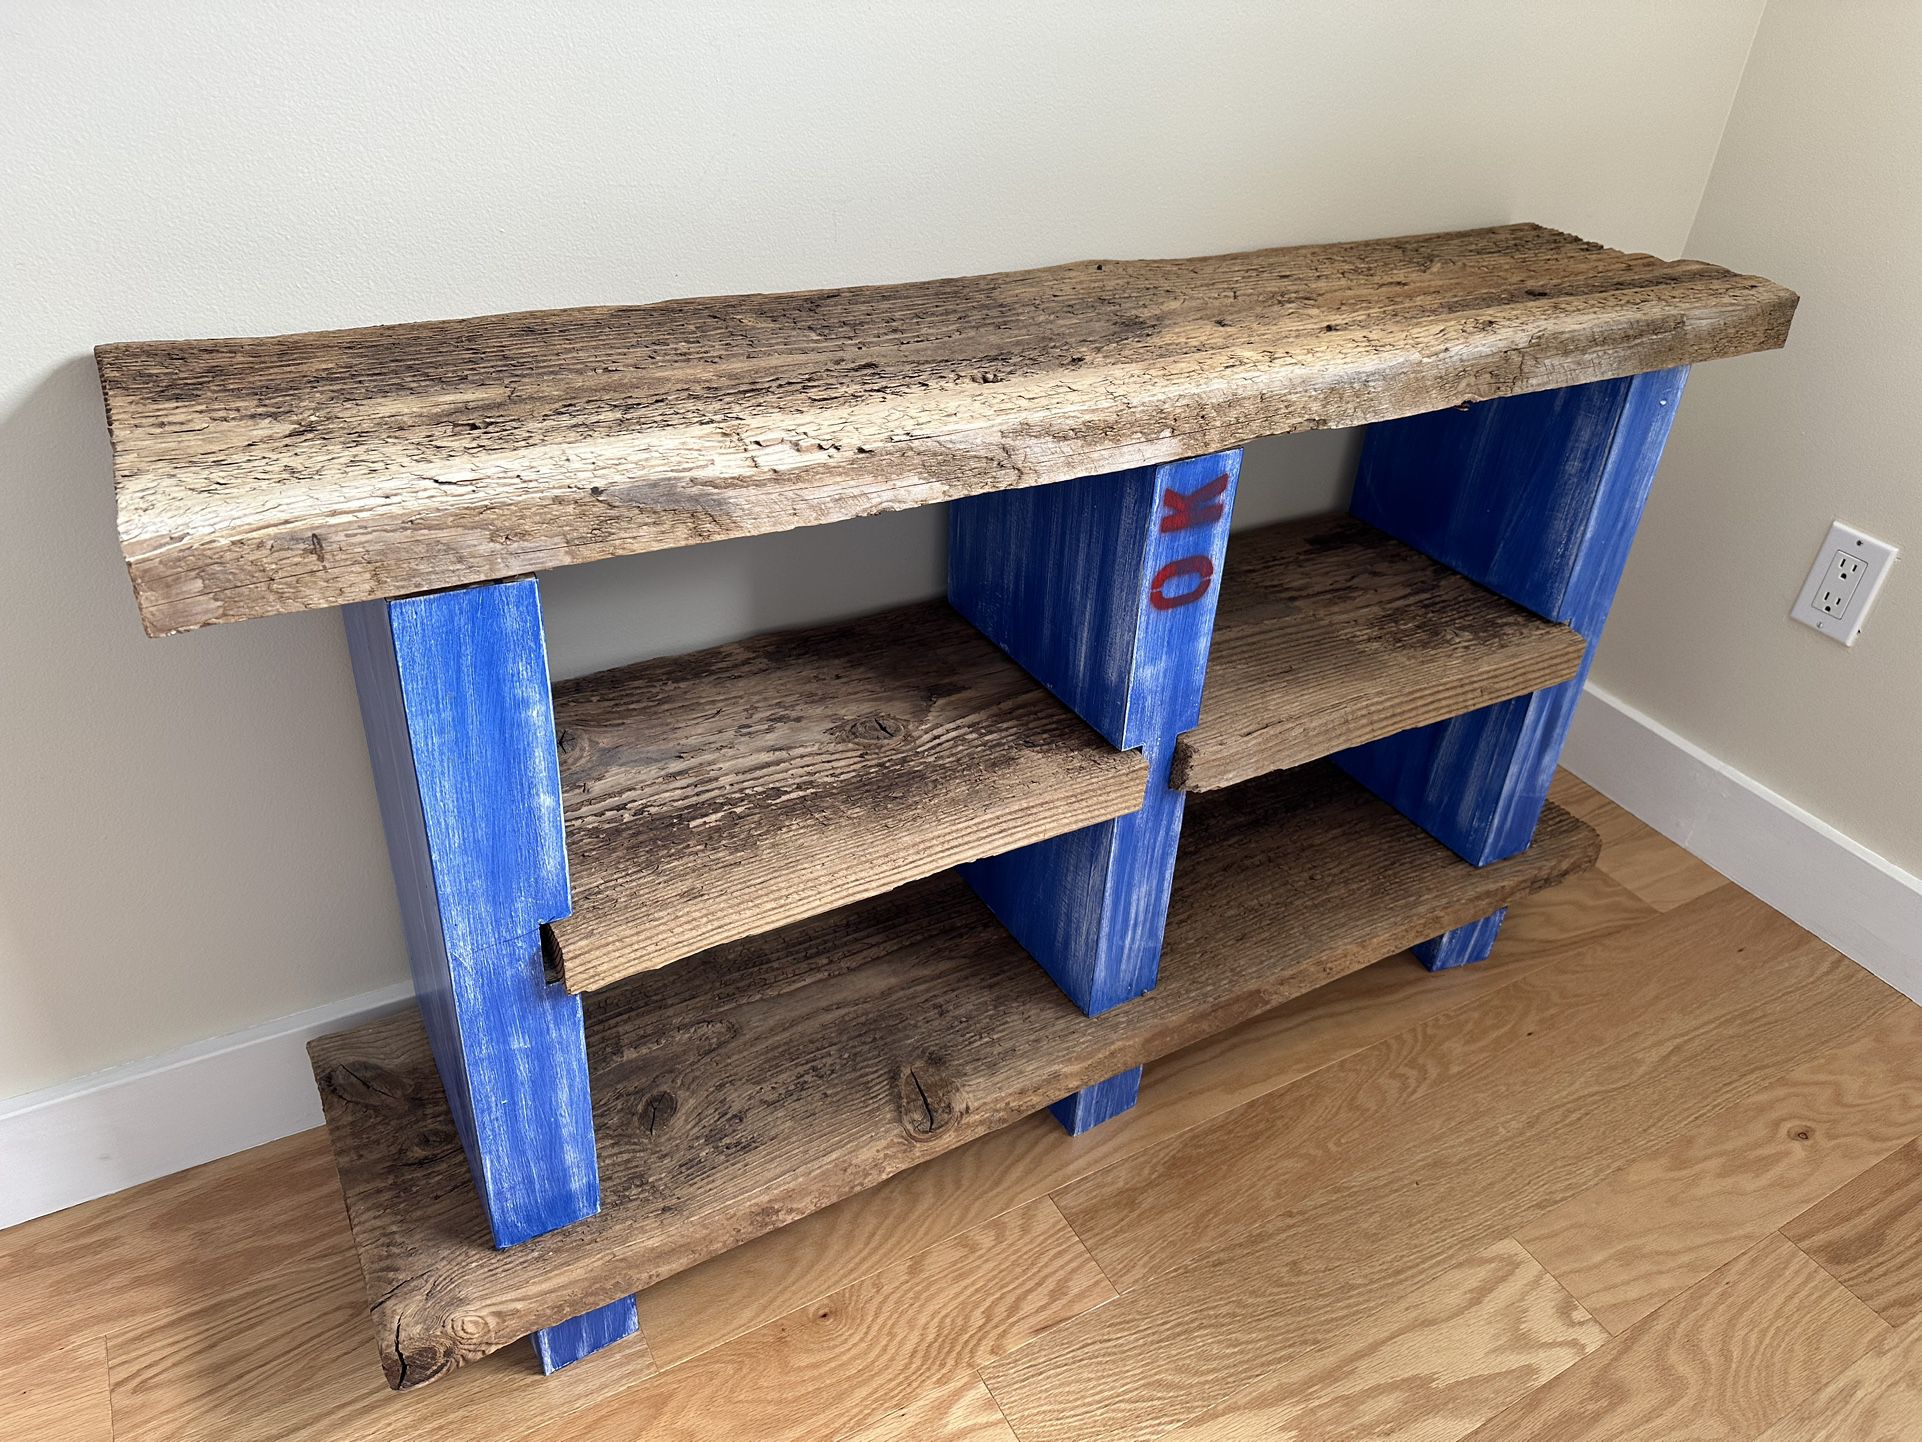 Set of 2 solid redwood artisanal bookshelves with blue sides and matching nightstand 